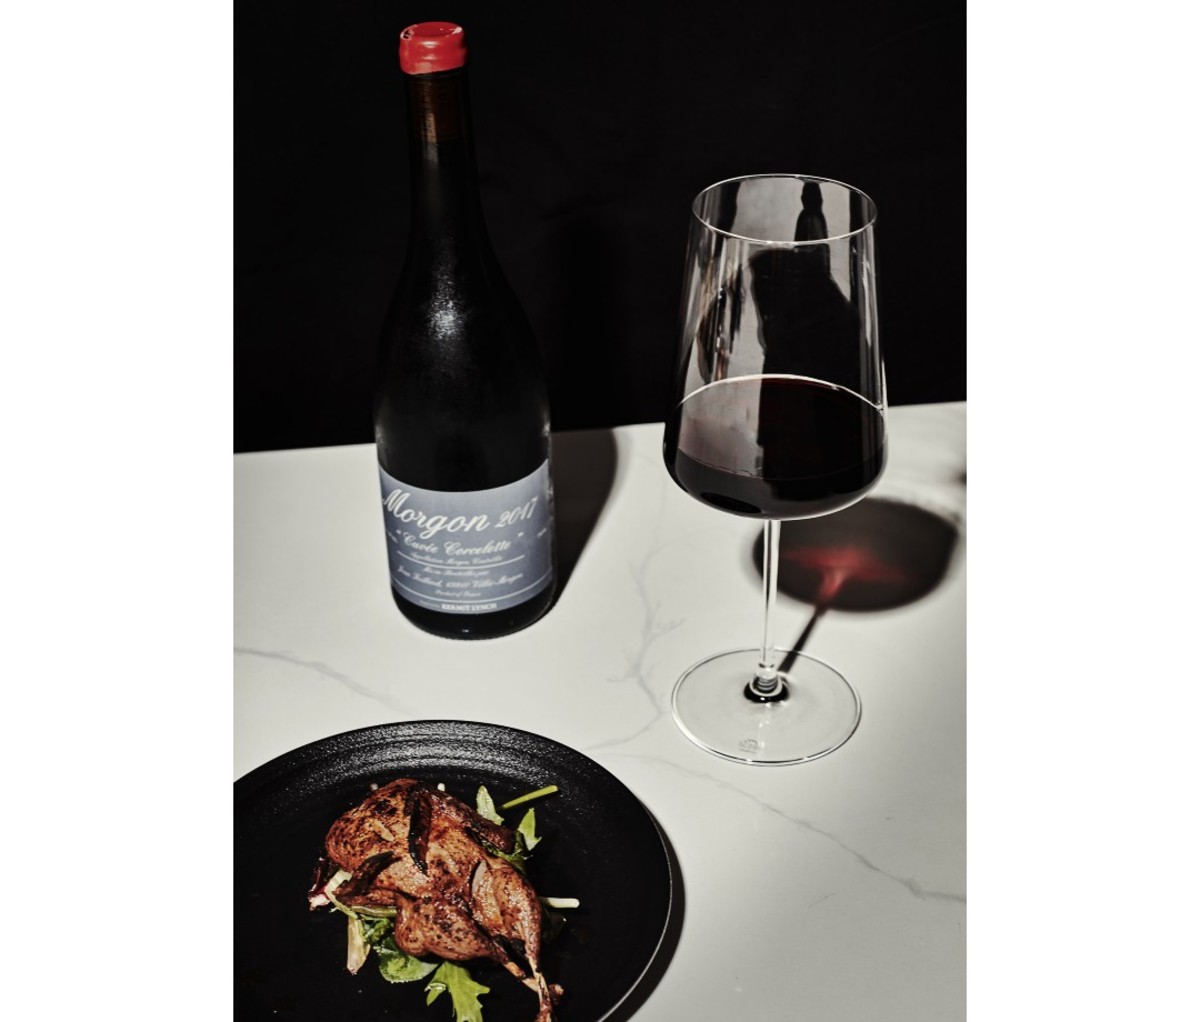 Glass of red wine next to bottle and plate of chicken